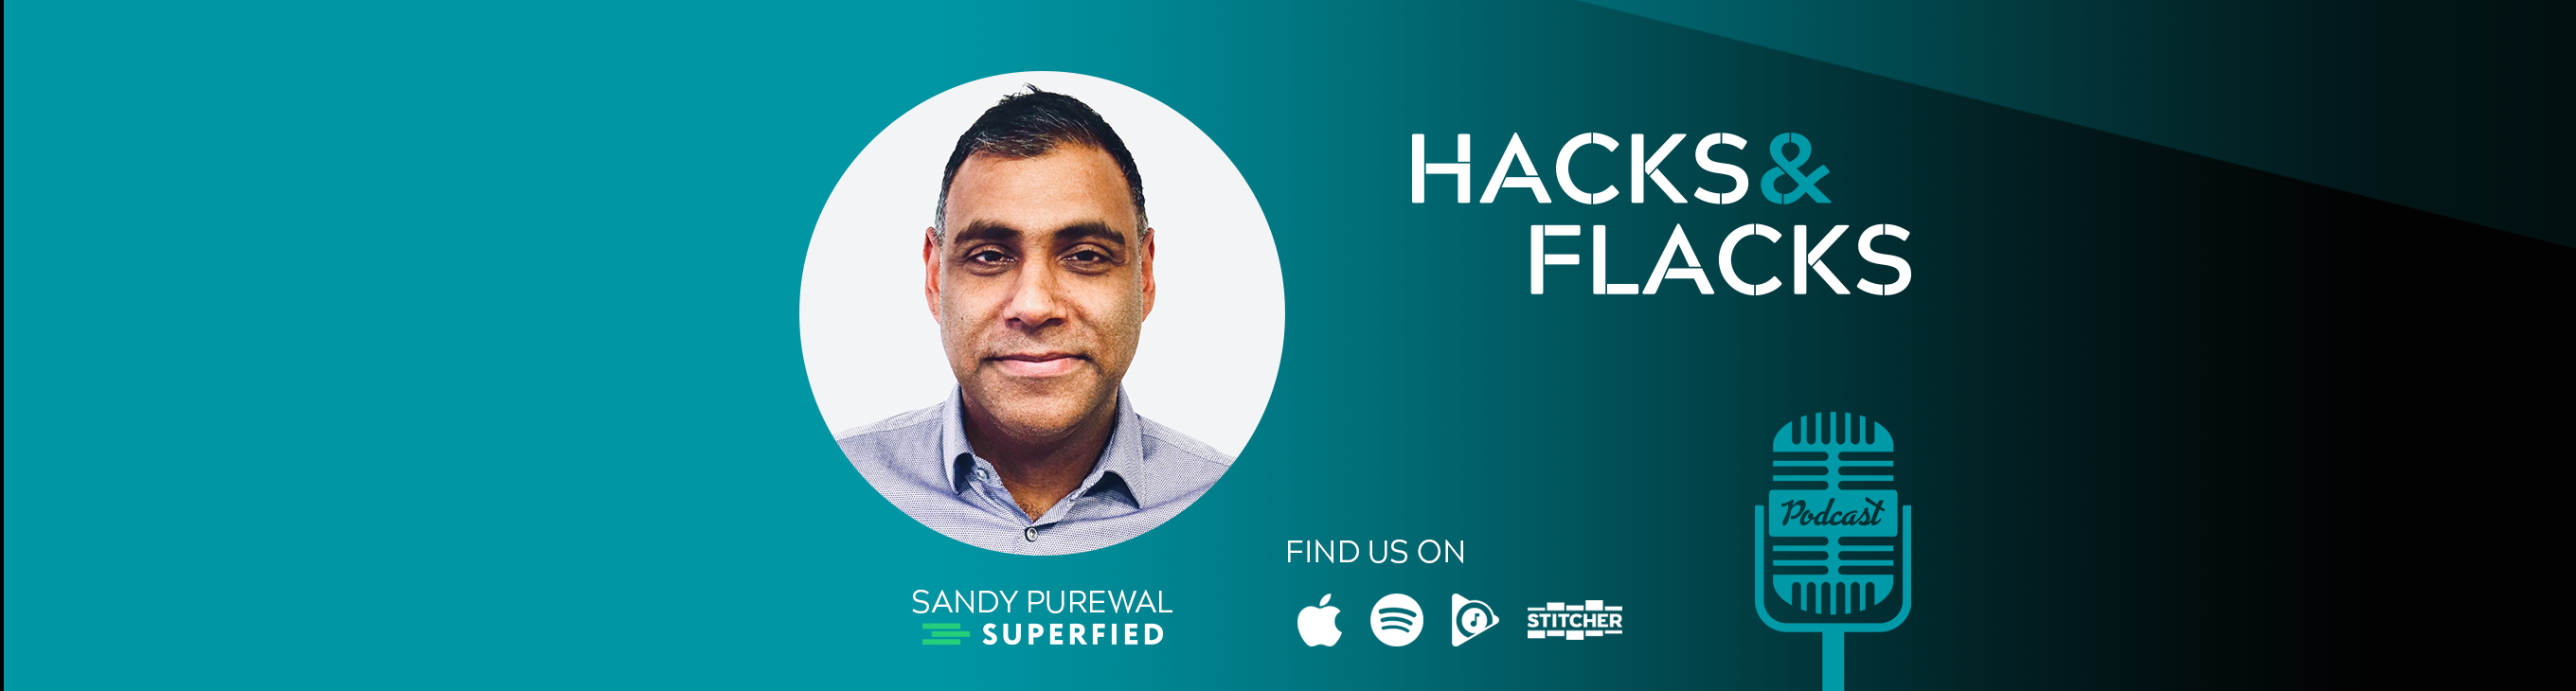 Making nutrition tech & wellness tech affordable and accessible with Sandy Purewal of Superfied